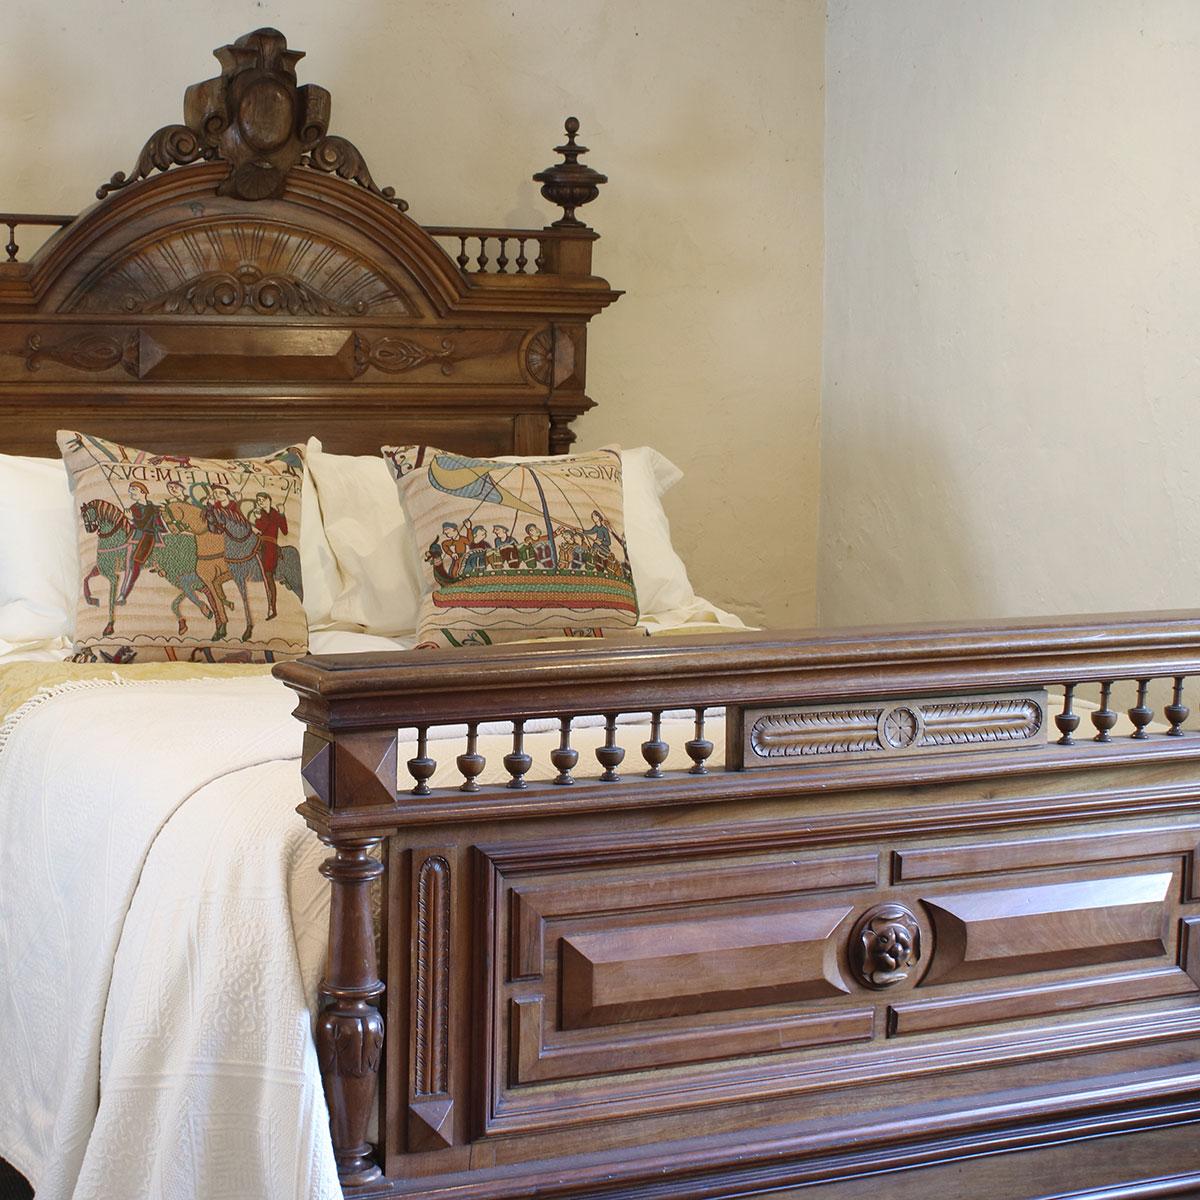 A magnificent walnut bed with turned posts, impressive head panel, pediment and turned finials.

This bed accepts a British King size or American Queen size, 5ft wide (60 inches or 150cm) base and mattress set.

The price includes a standard